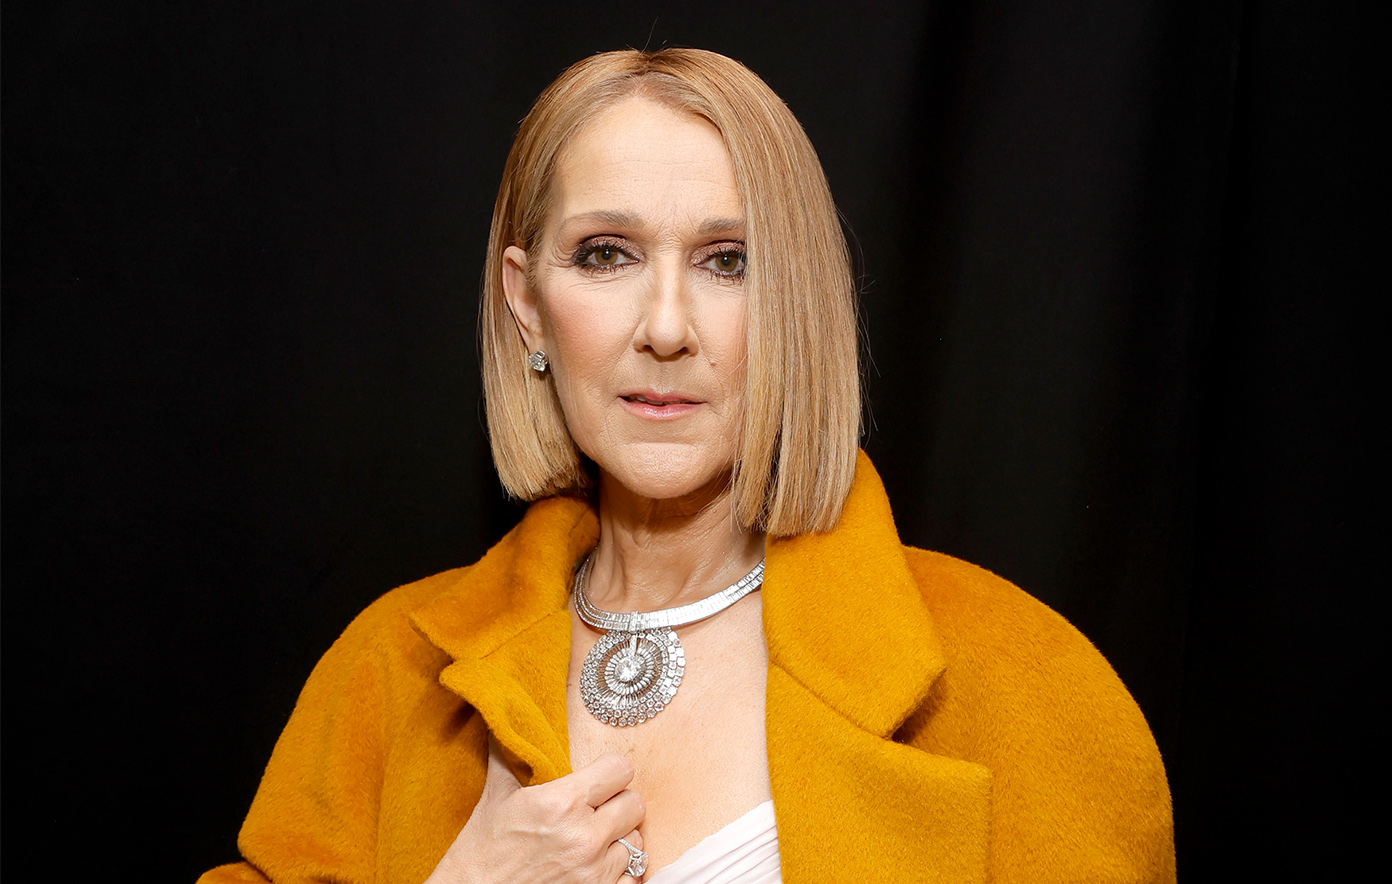 Celine Dion bares all in trailer for new documentary: “If I can’t walk, I’ll crawl”